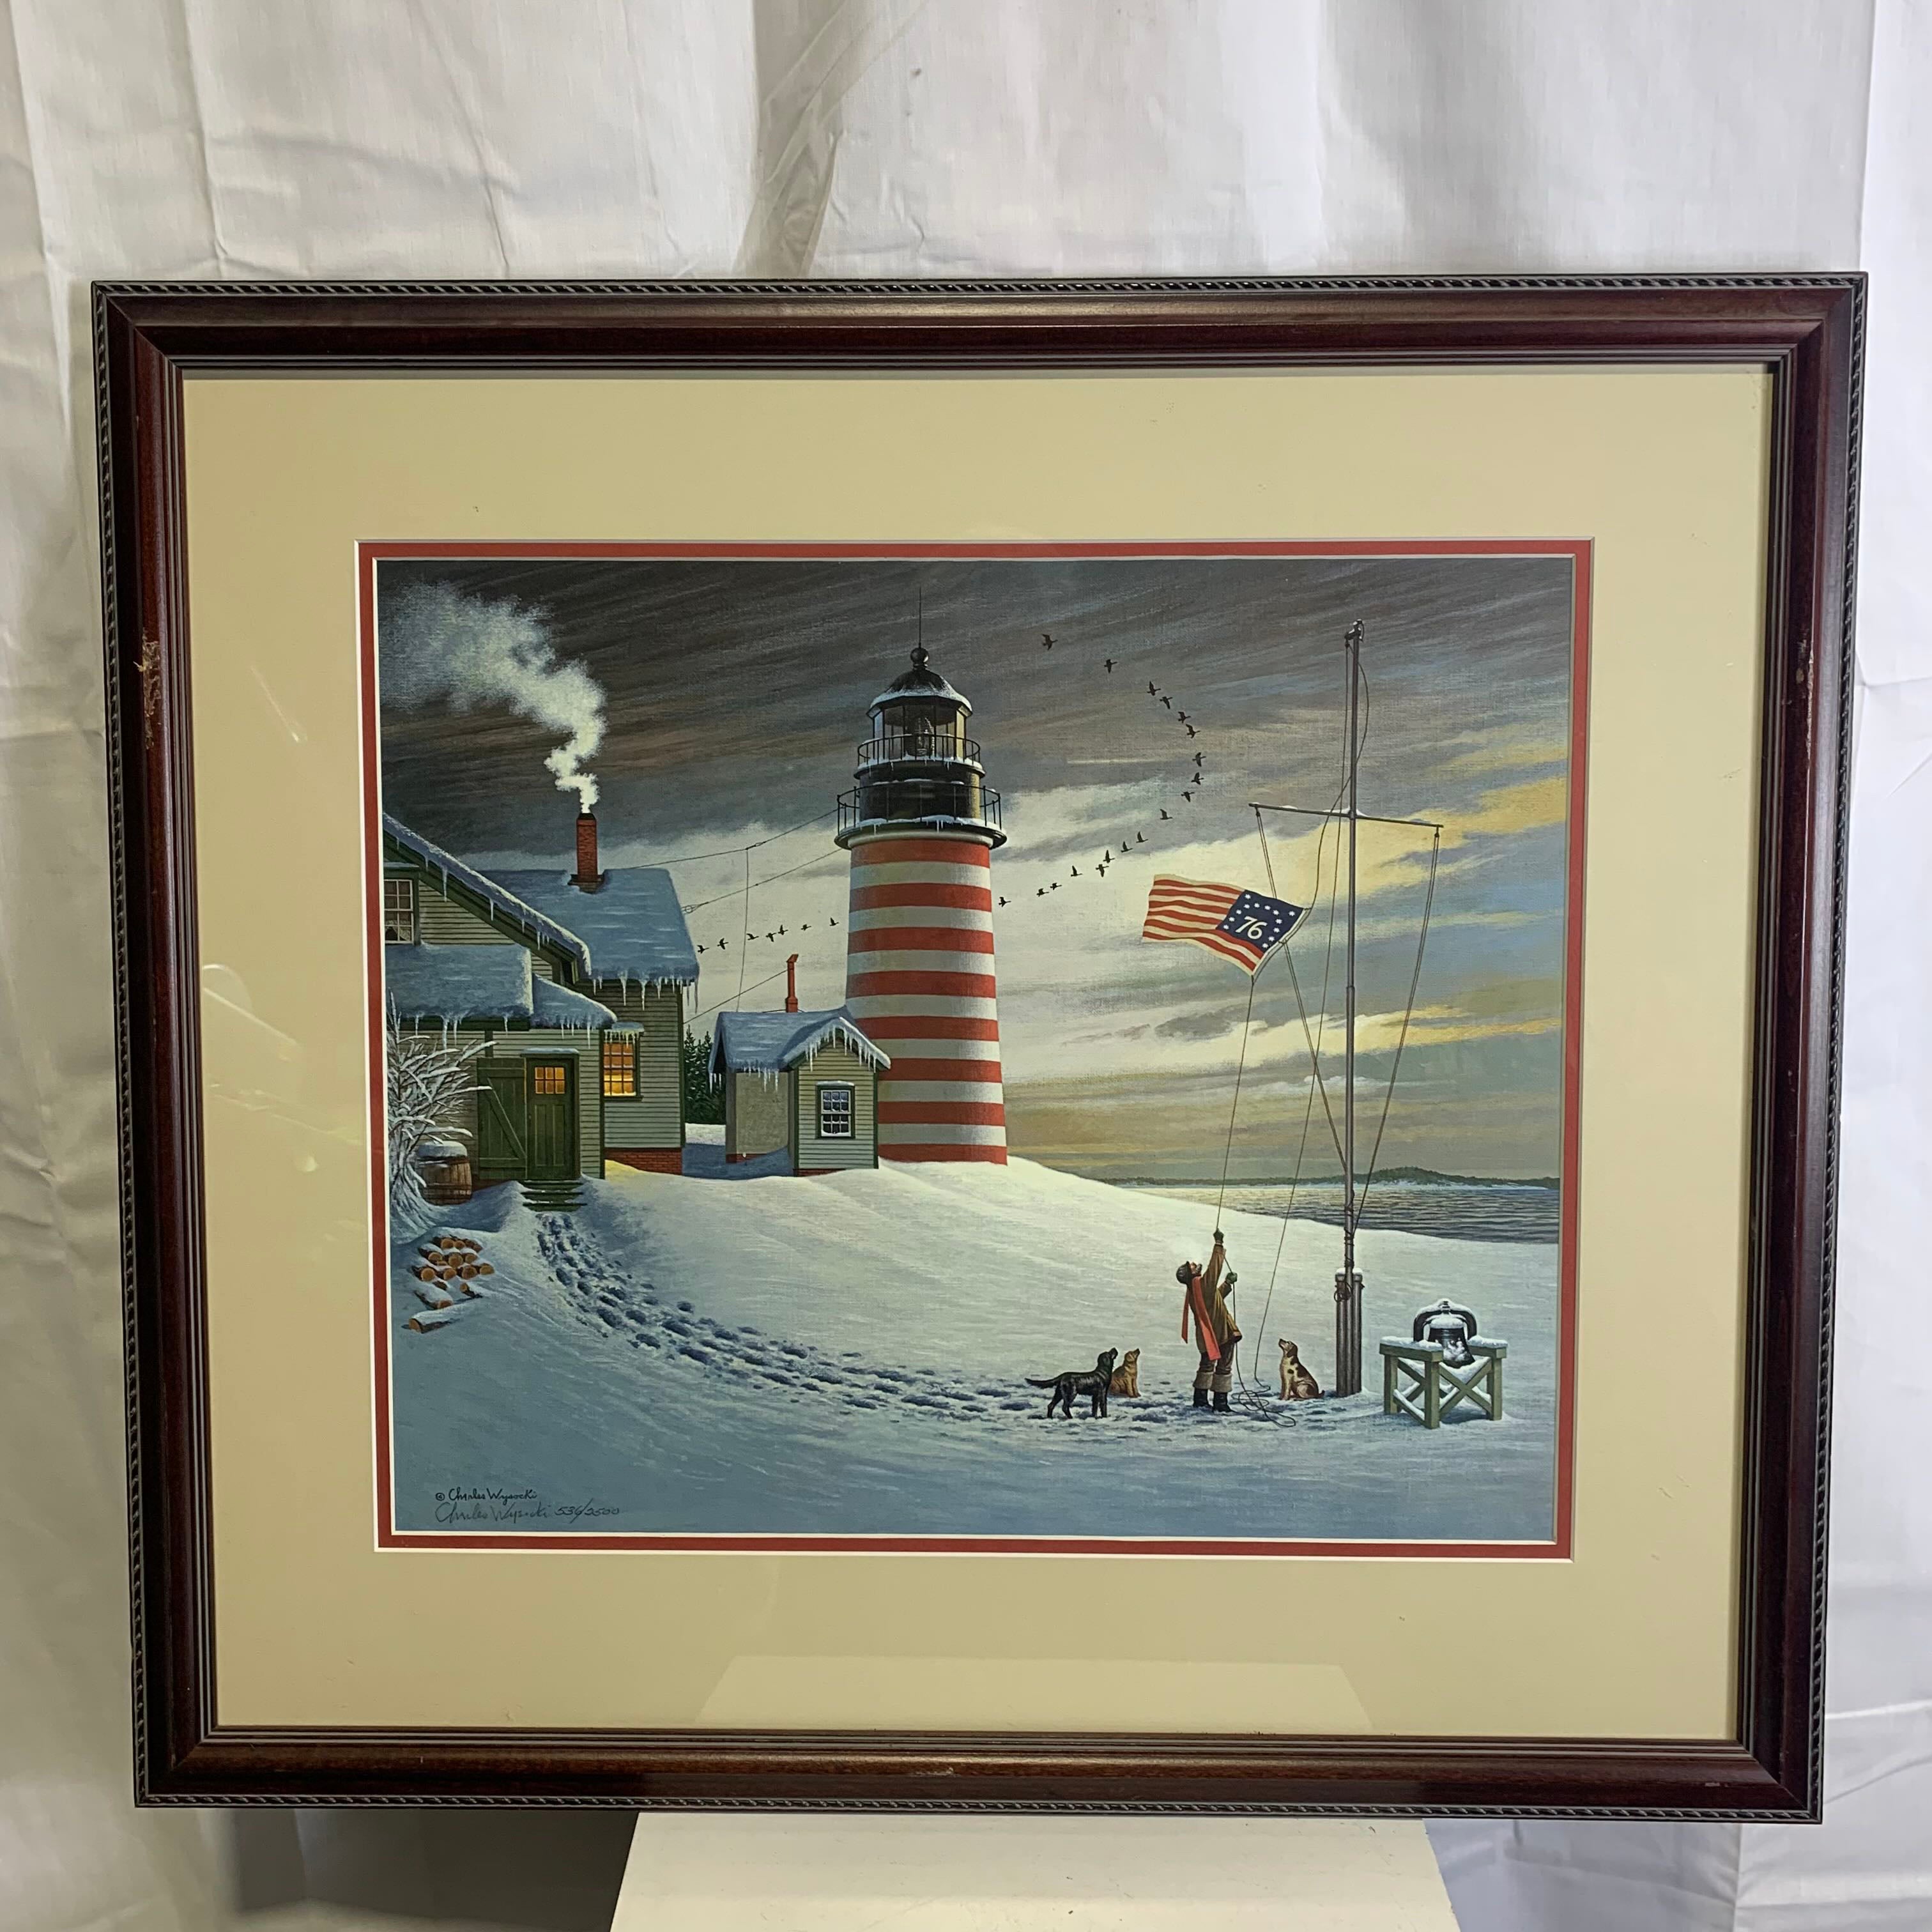 26"x 23" West Quoddy Head Light by Charles Wysocki Framed and Signed Print 536/2500